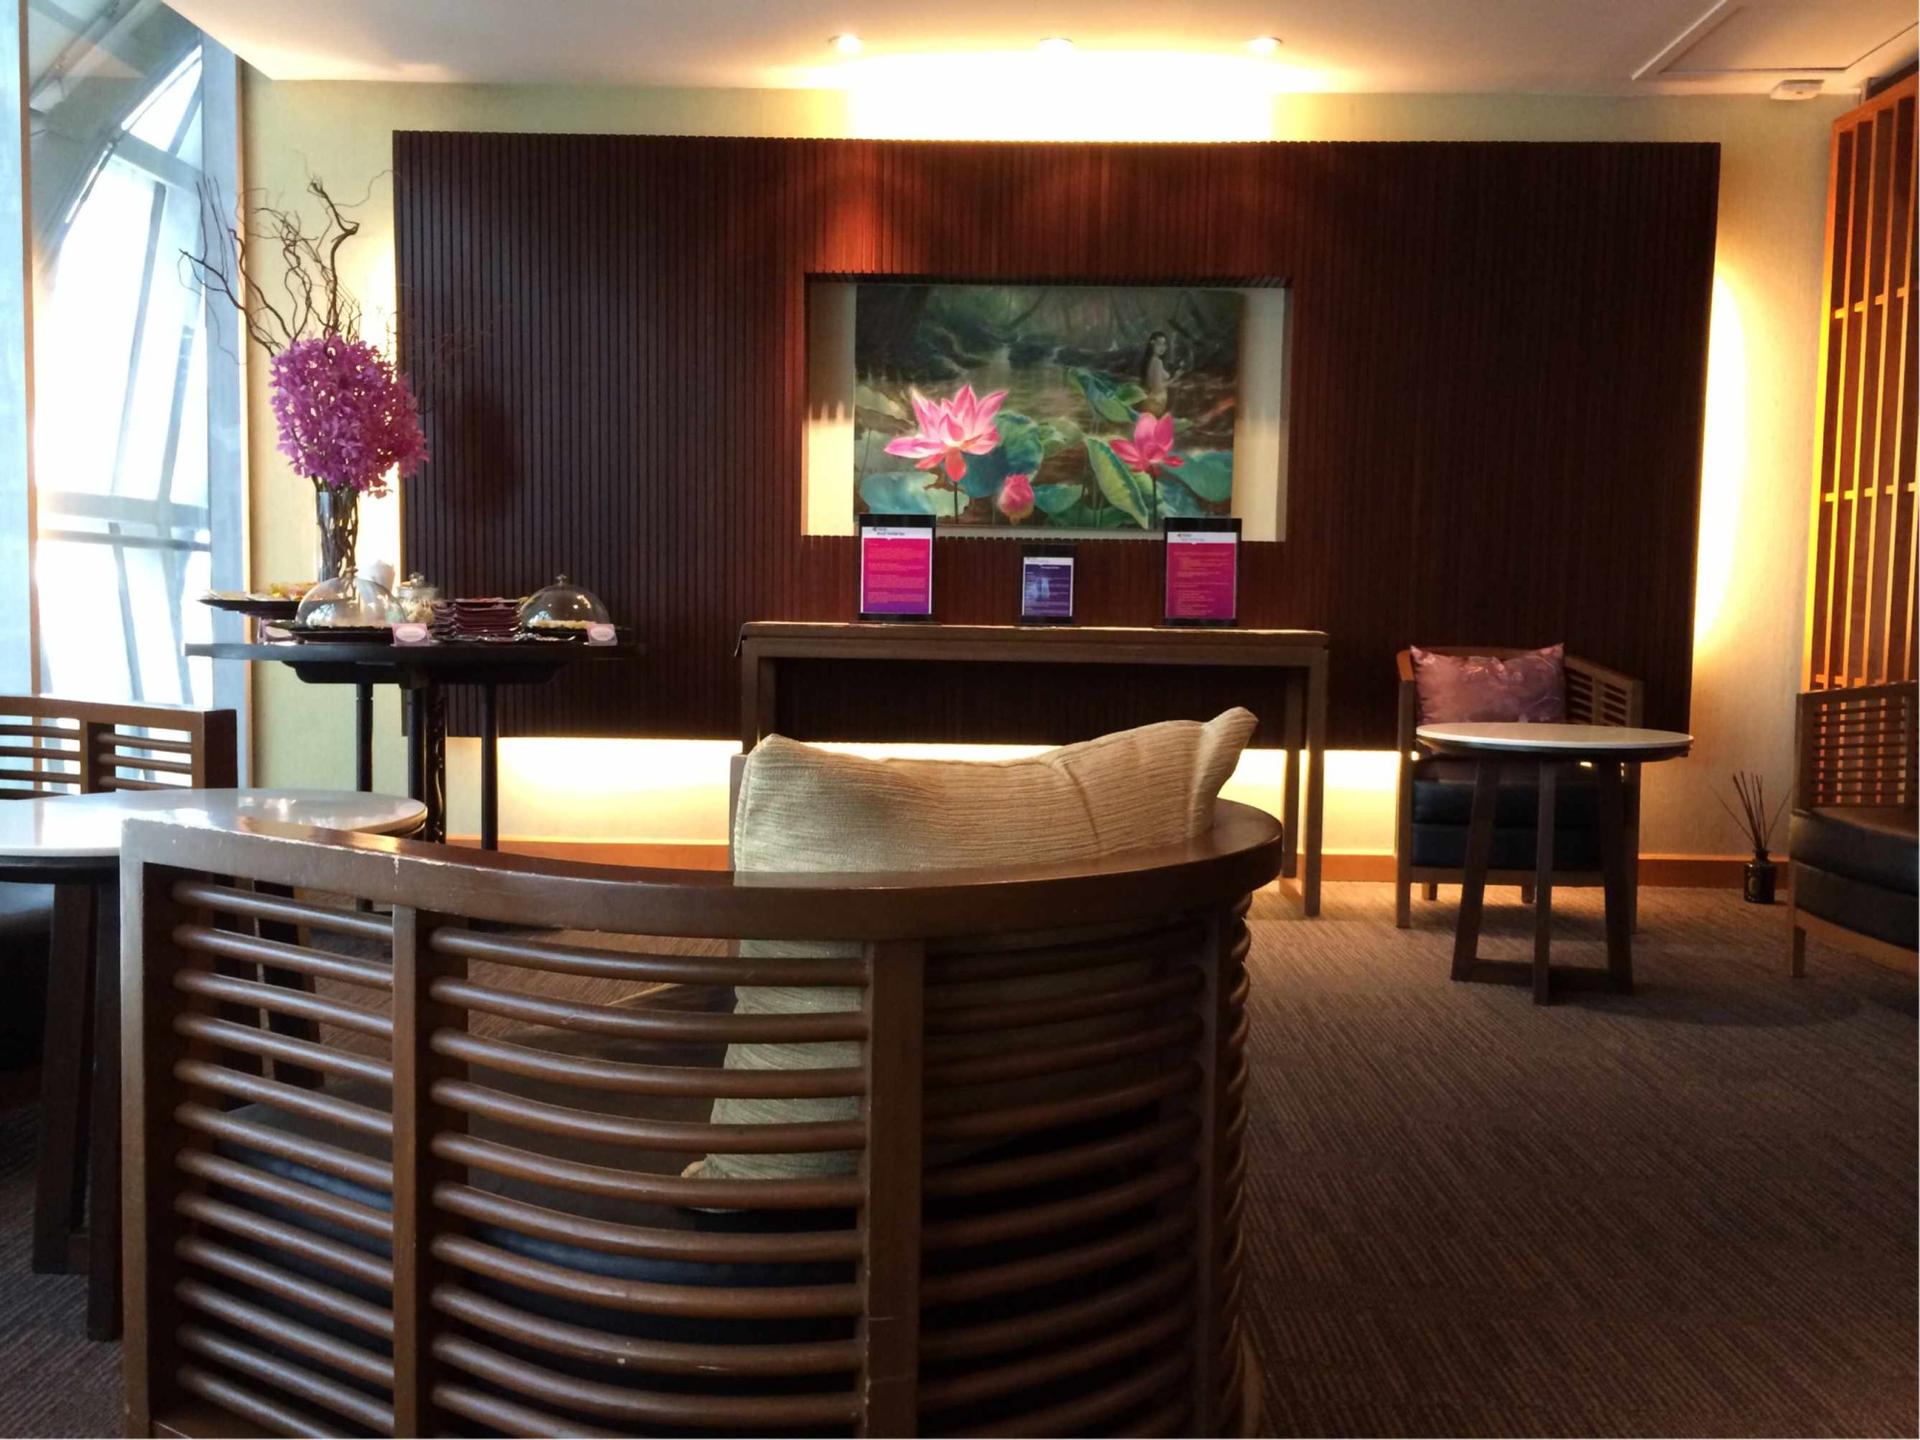 Thai Airways Royal Orchid Spa  image 8 of 25